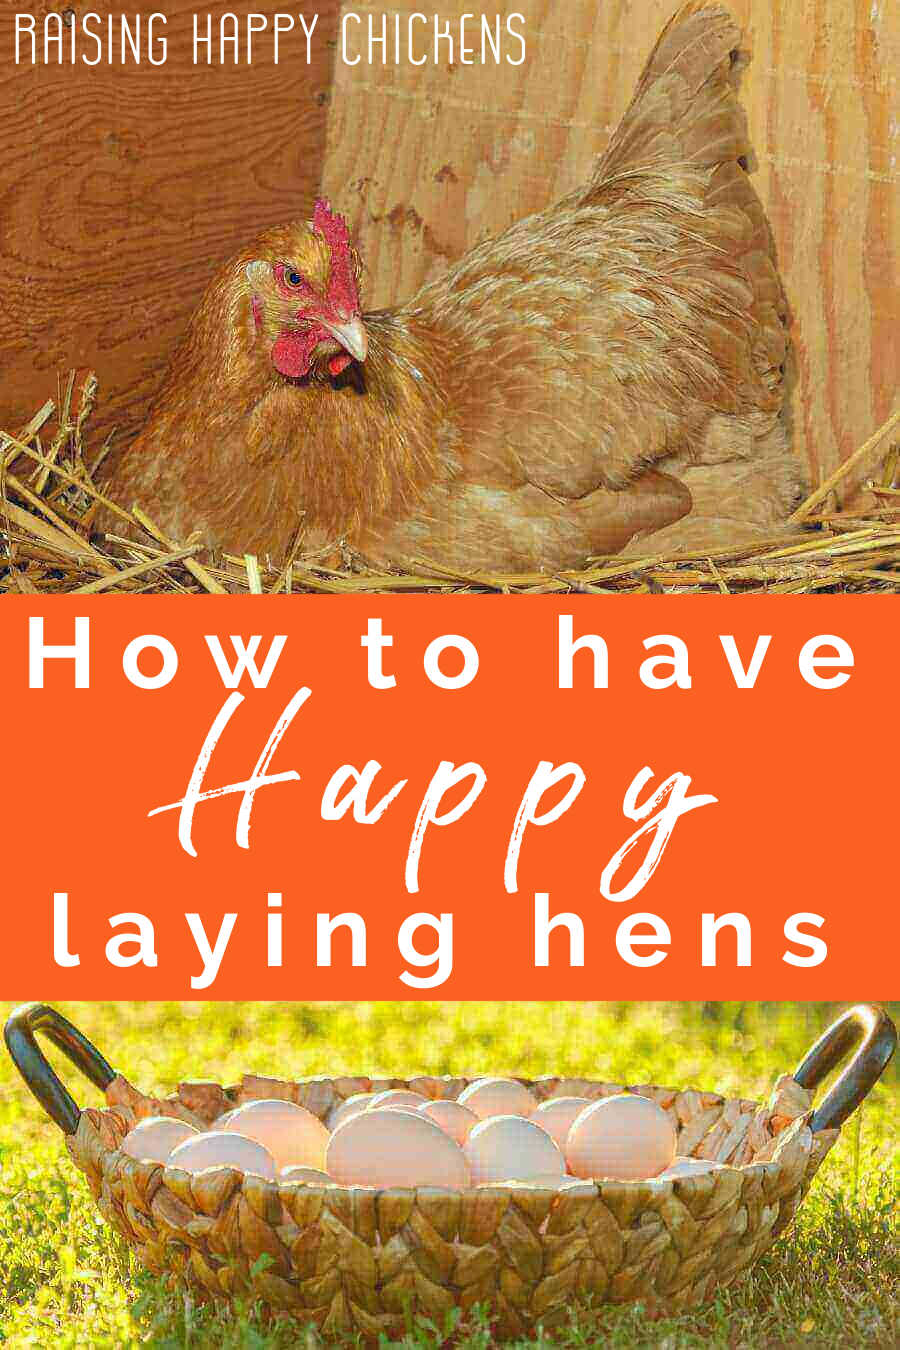 What Are The Benefits Of Hens Laying Eggs?